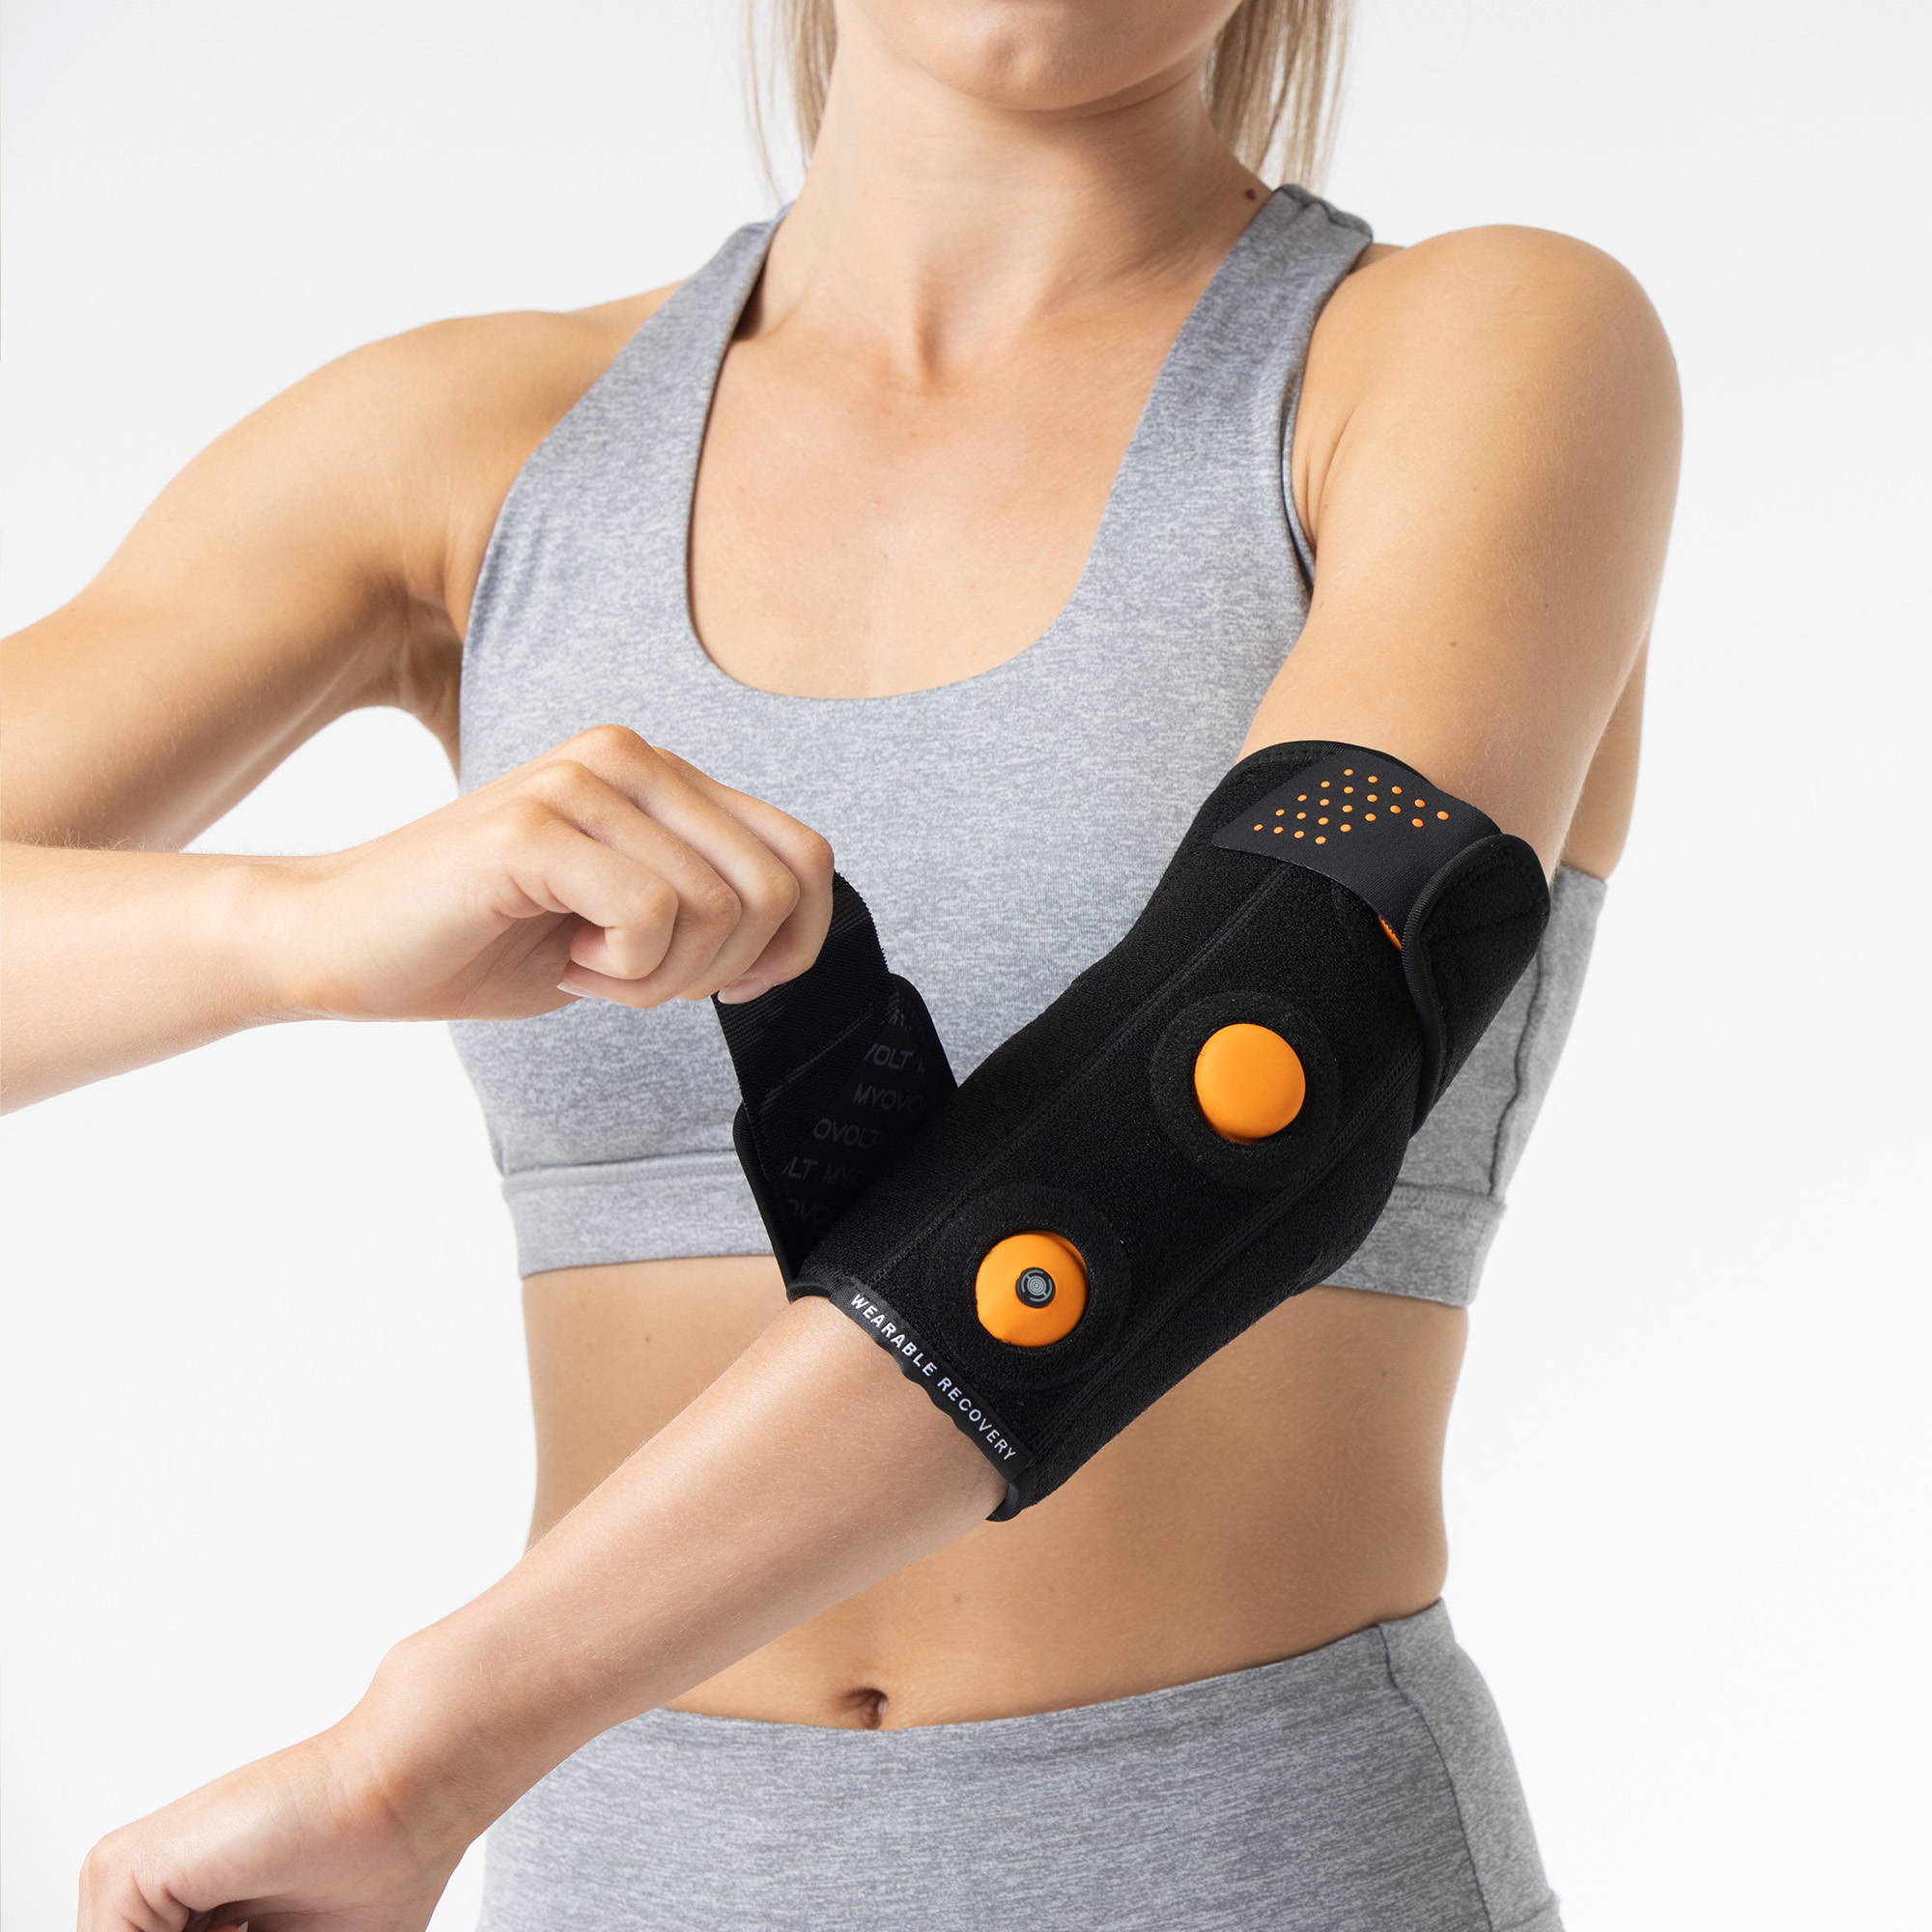 Myovolt vibration therapy arm brace for muscle pain relief, repetitive strain and tendinitis in elbows from sports and exercise.